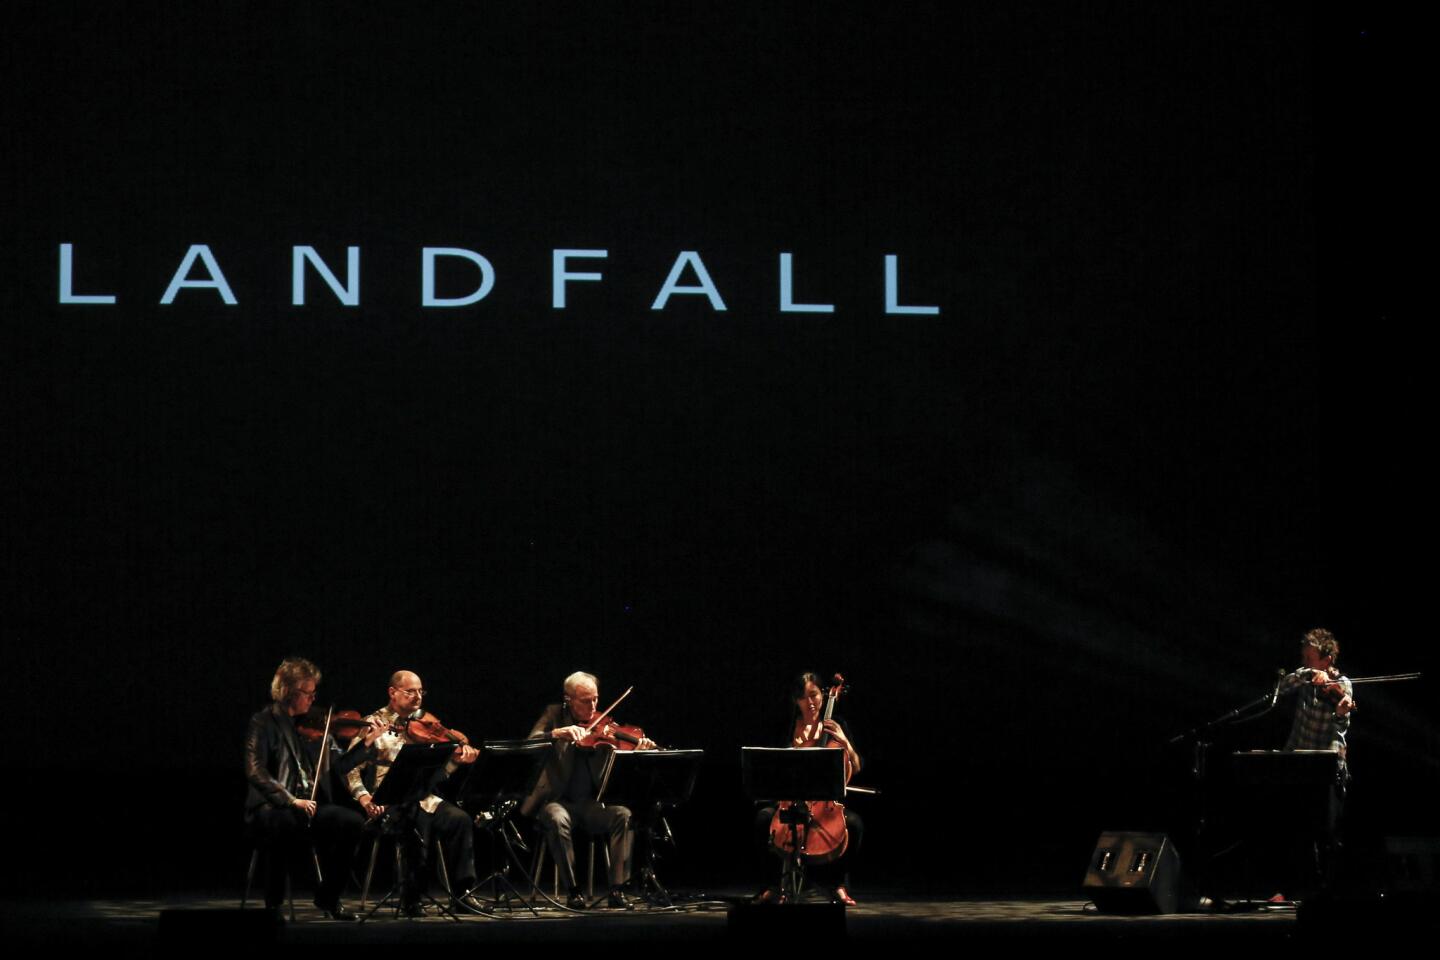 The two leading string quartets devoted to our time turned 40. Kronos celebrated at UCLA with Laurie Anderson's magically melancholic response to Hurricane Sandy (pictured). Two days later, the Arditti featured exceptional performances of British, American and German modernist masters.